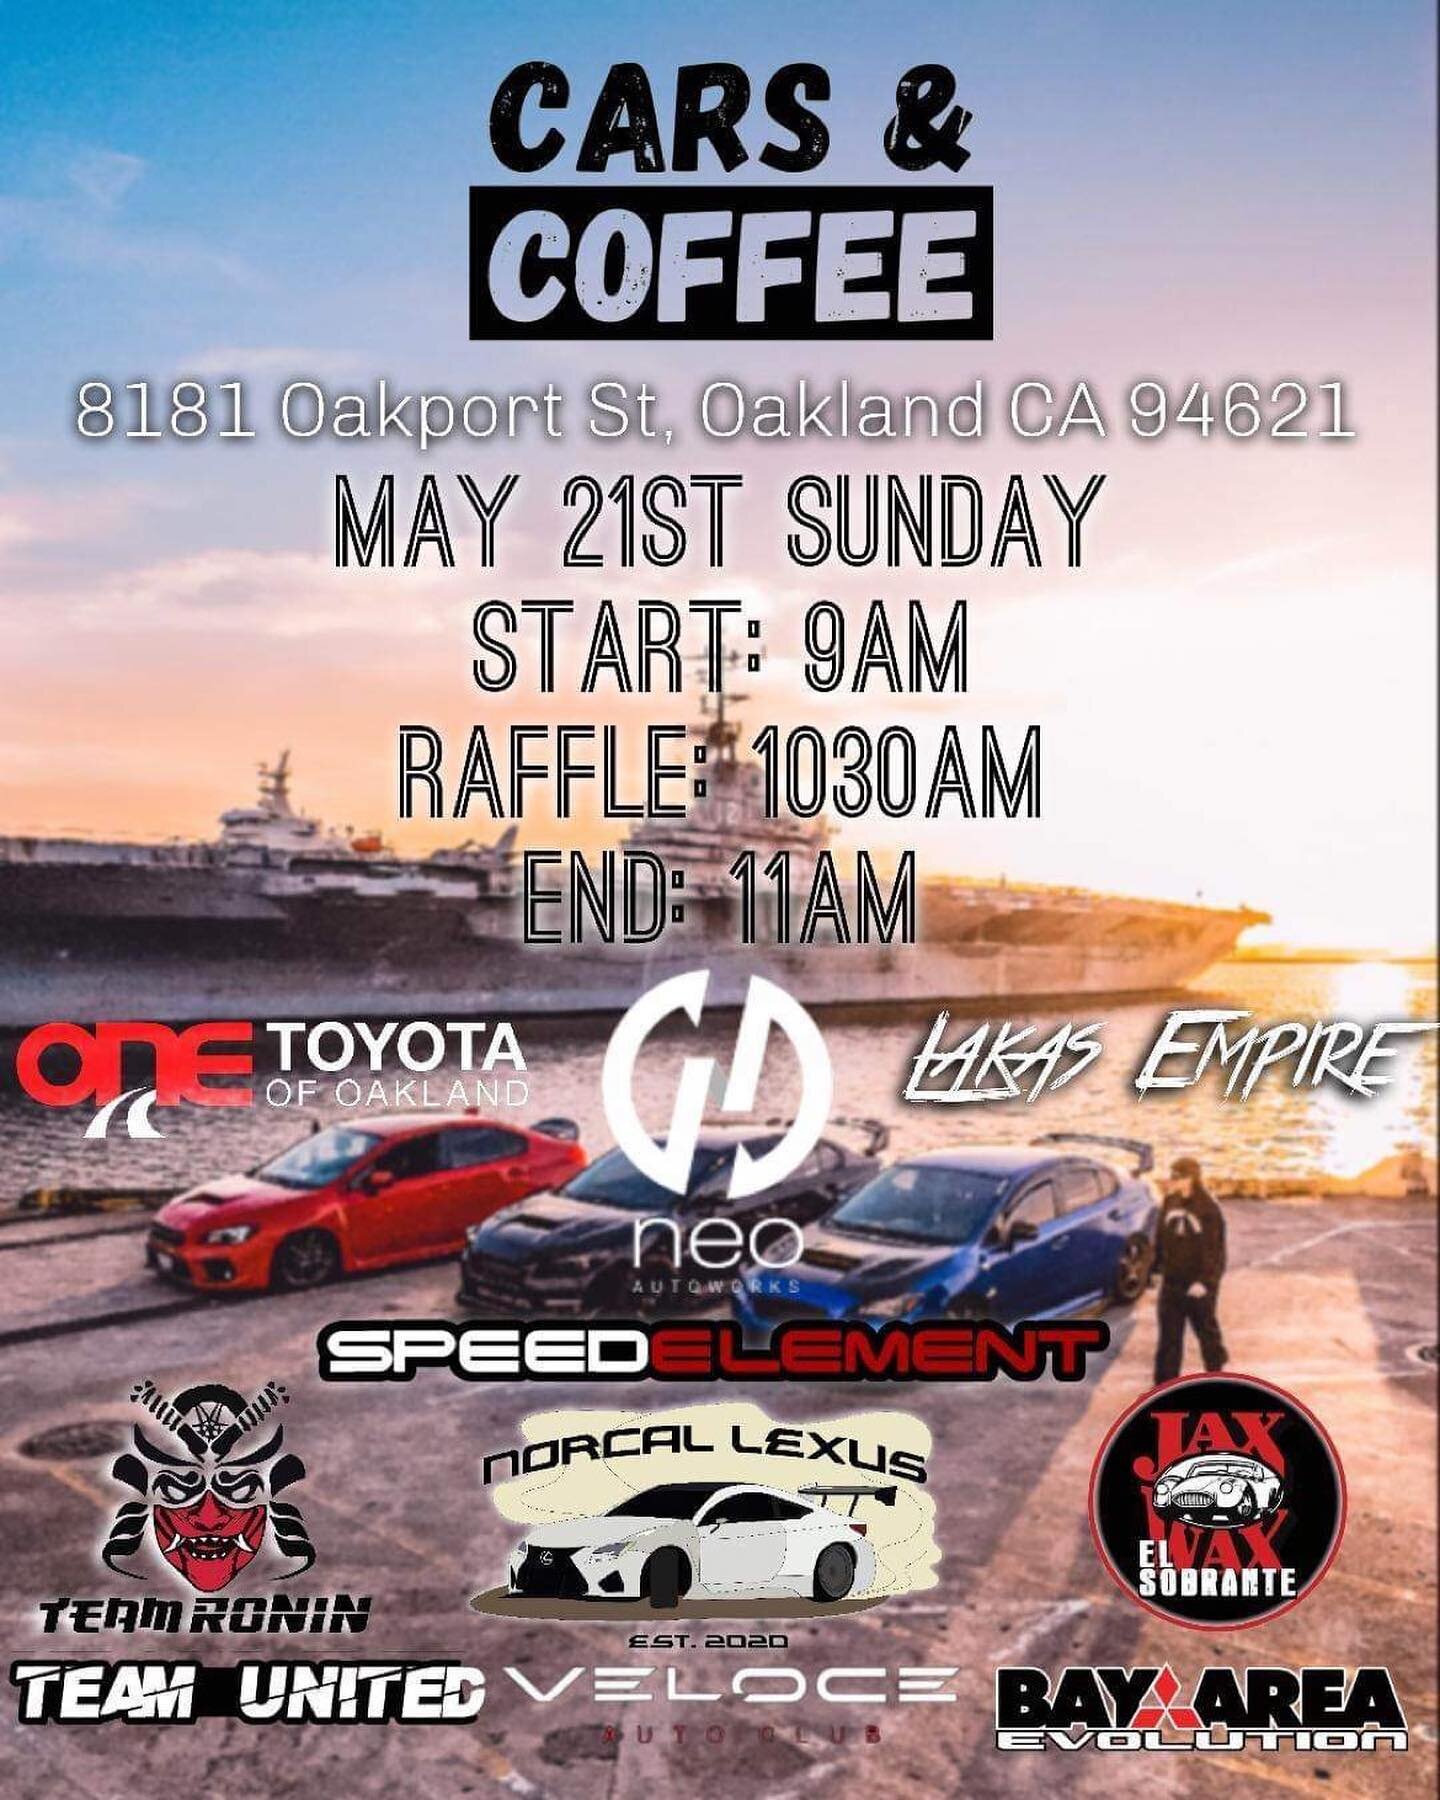 Come thru to cars and coffee with us!
.
.
.
#speedsf #speedsftrackevents #speedelement #carsandcoffee #bayarea #bayareacars